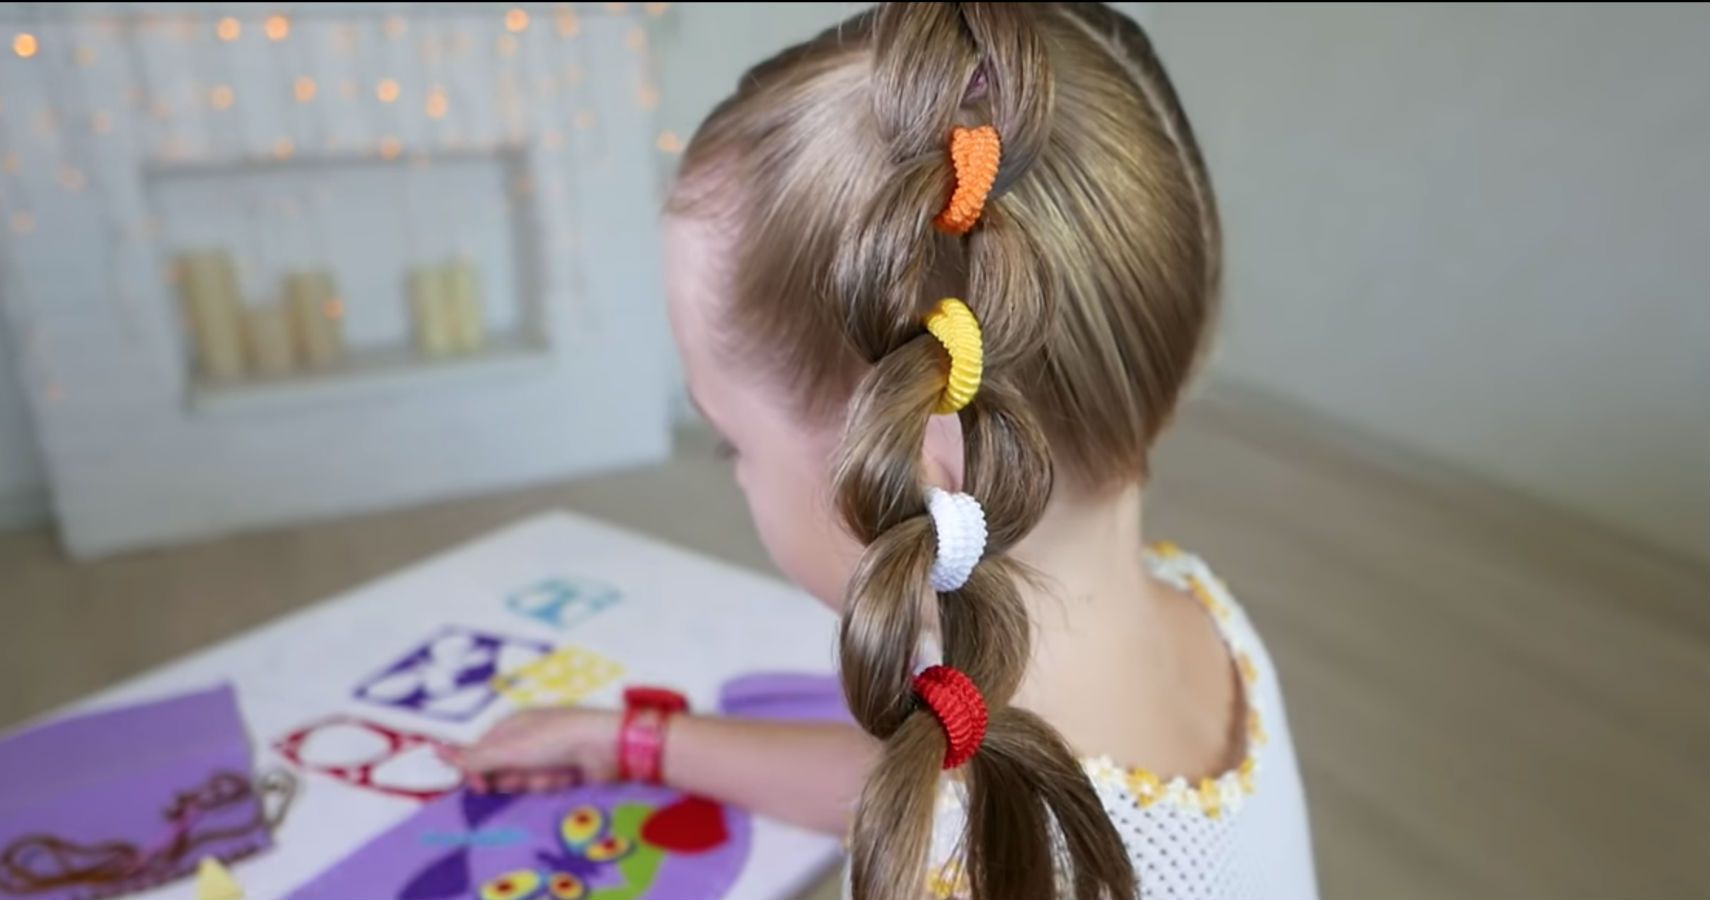 10 Easy Little Girls Hairstyles (5 Minutes) | Somewhat Simple